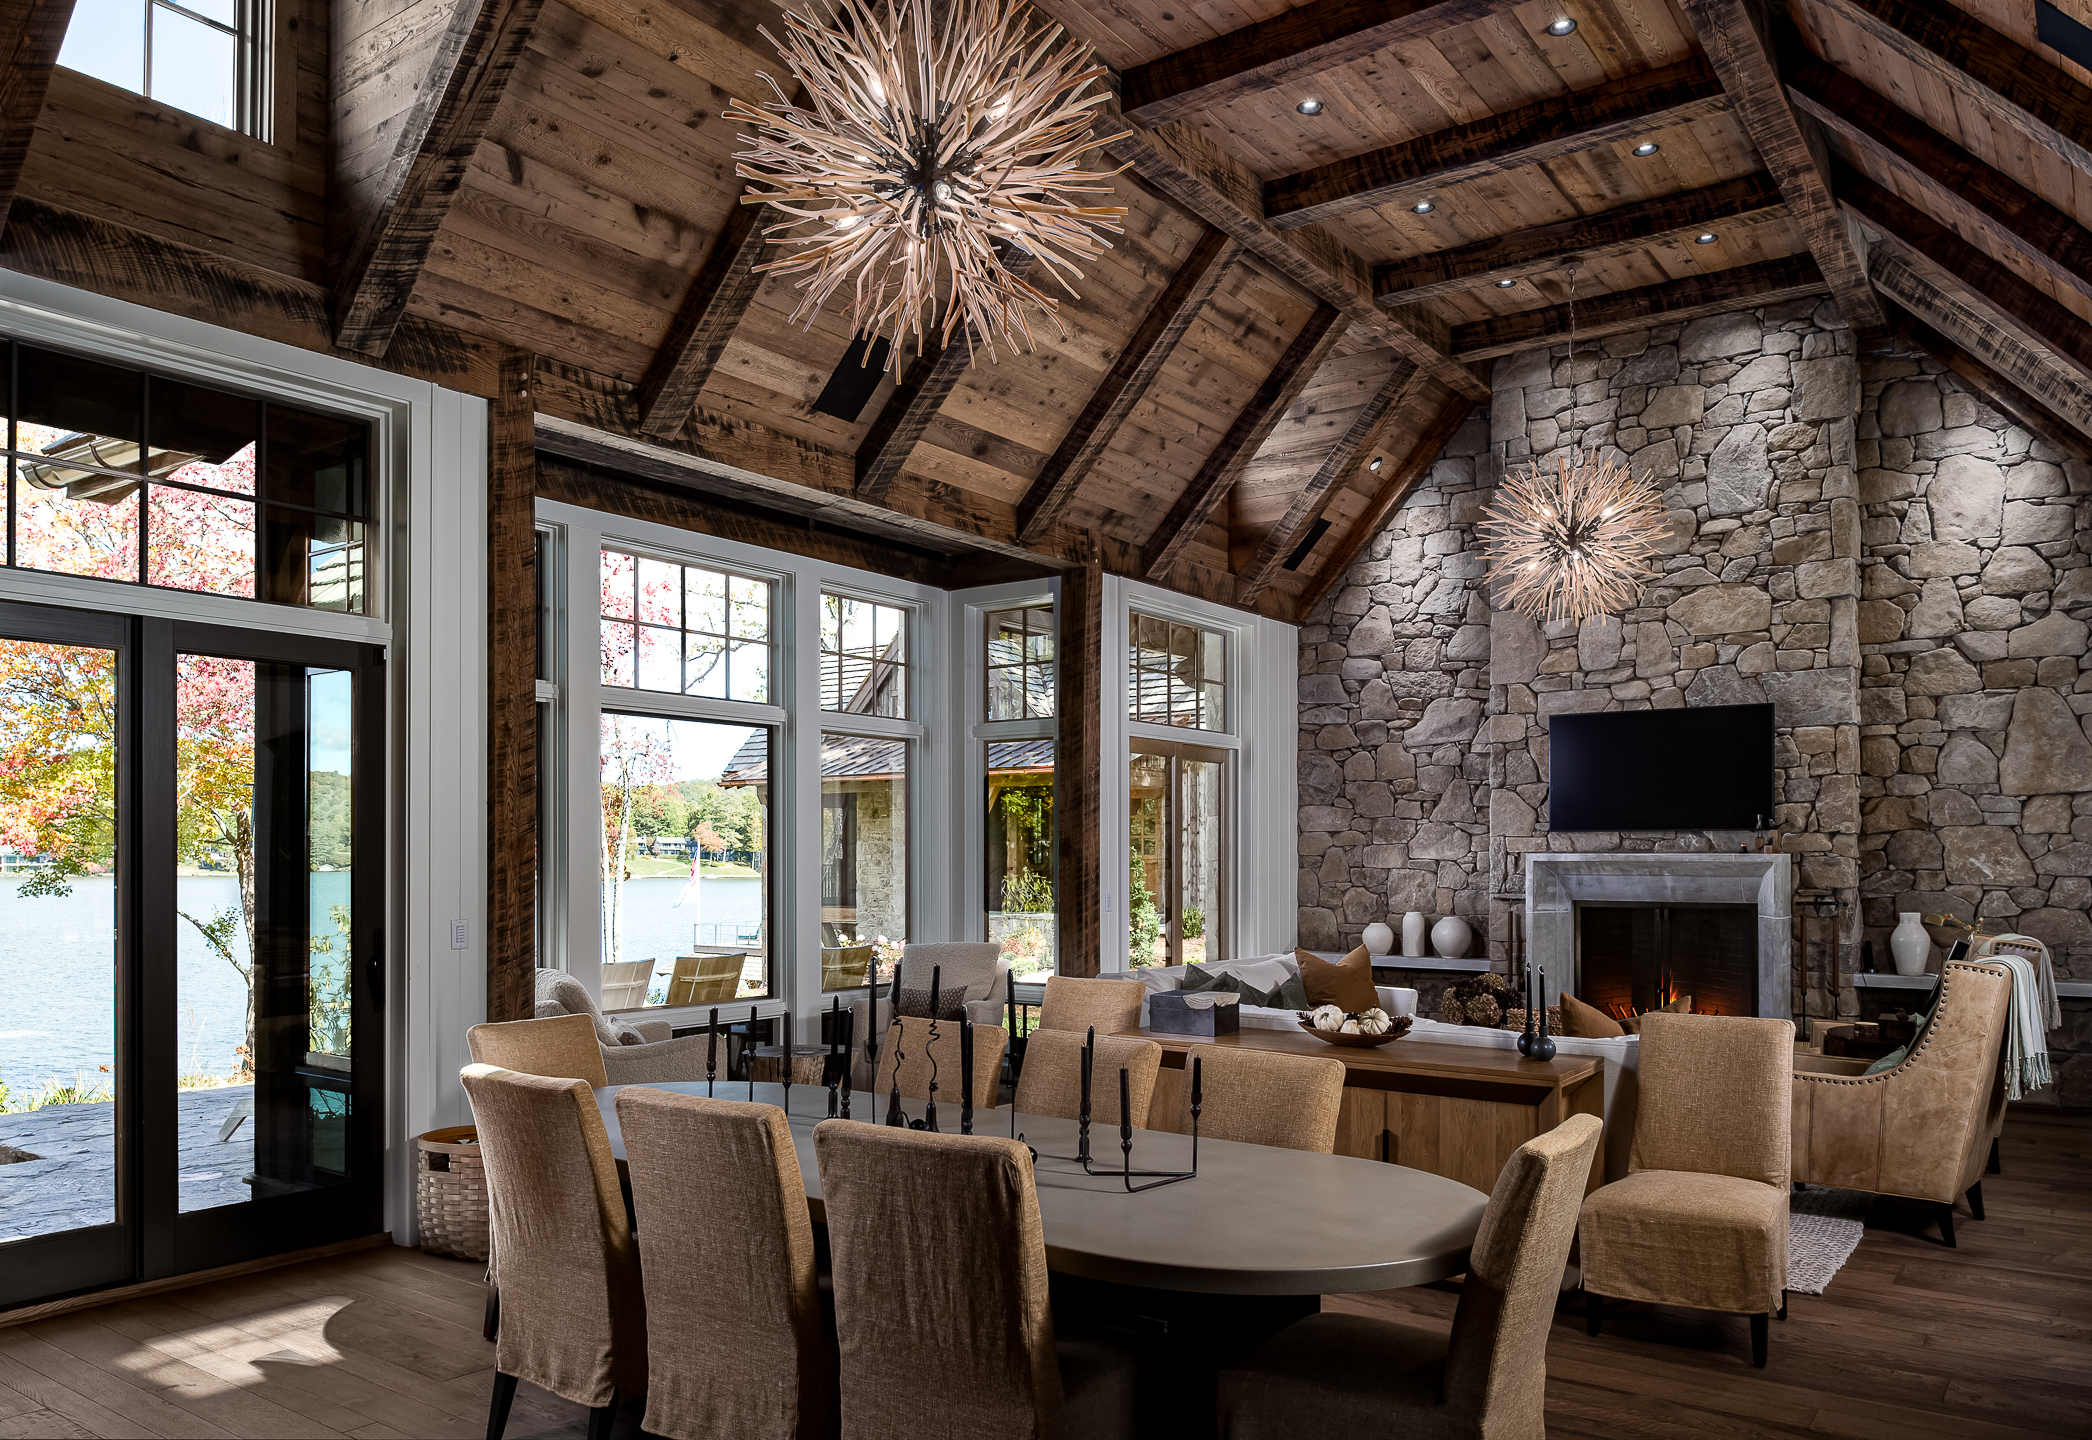 A large living room with stone walls and a fireplace. captured by a commercial architectural photographer